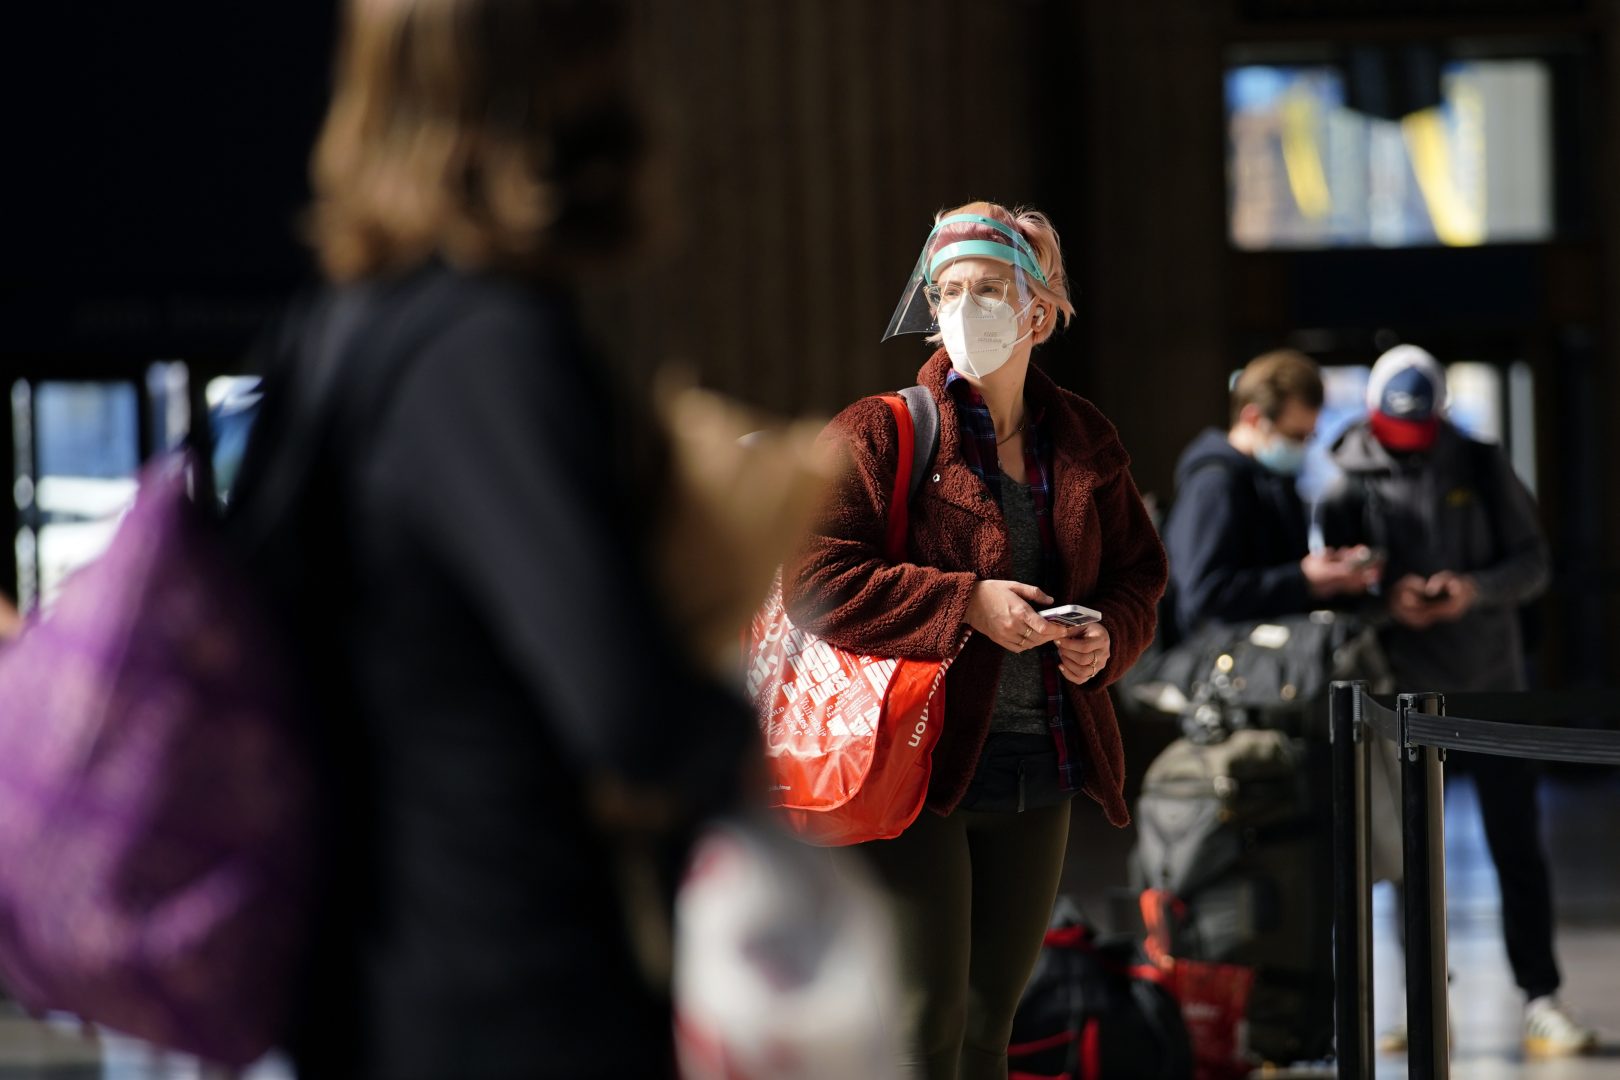 A woman waits in line for a train at the 30th Street Station ahead of the Thanksgiving holiday, Friday, Nov. 20, 2020, in Philadelphia. As governors and mayors grapple with an out-of-control pandemic, they are ratcheting up mask mandates and imposing restrictions on small indoor gatherings, which have been blamed for accelerating the spread of the coronavirus.